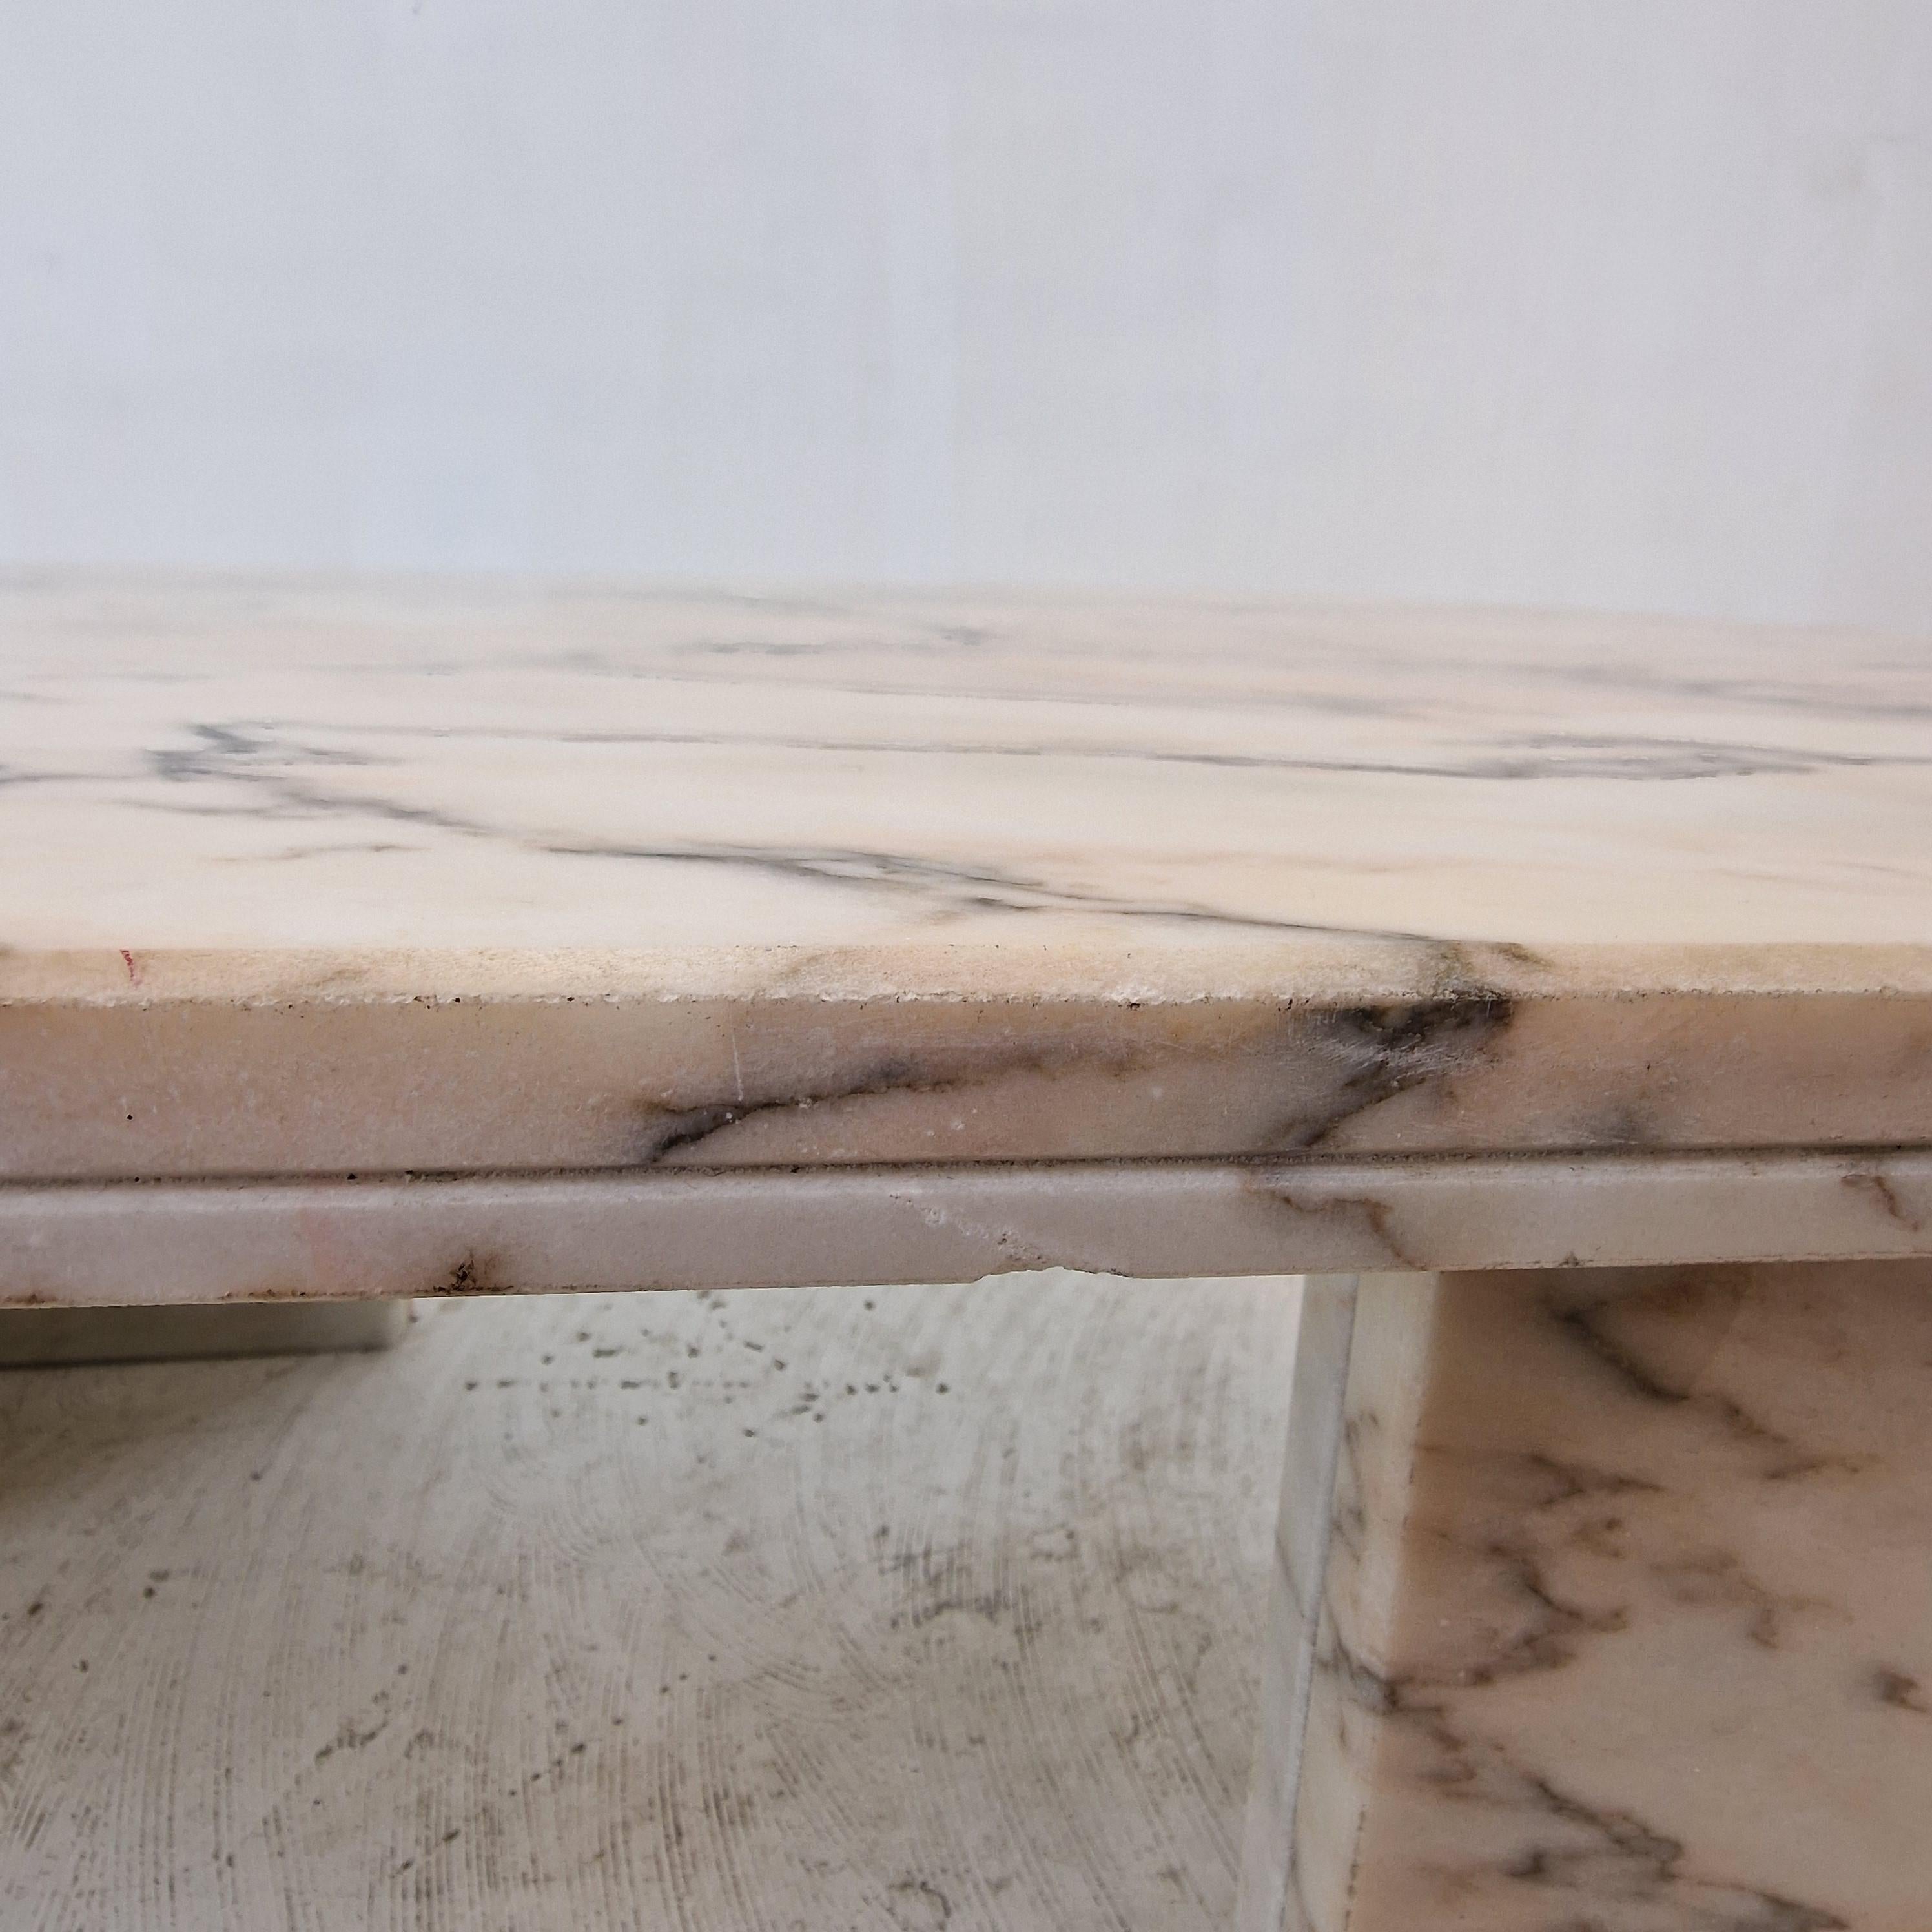 Italian Marble Coffee or Side Table, 1980s For Sale 10